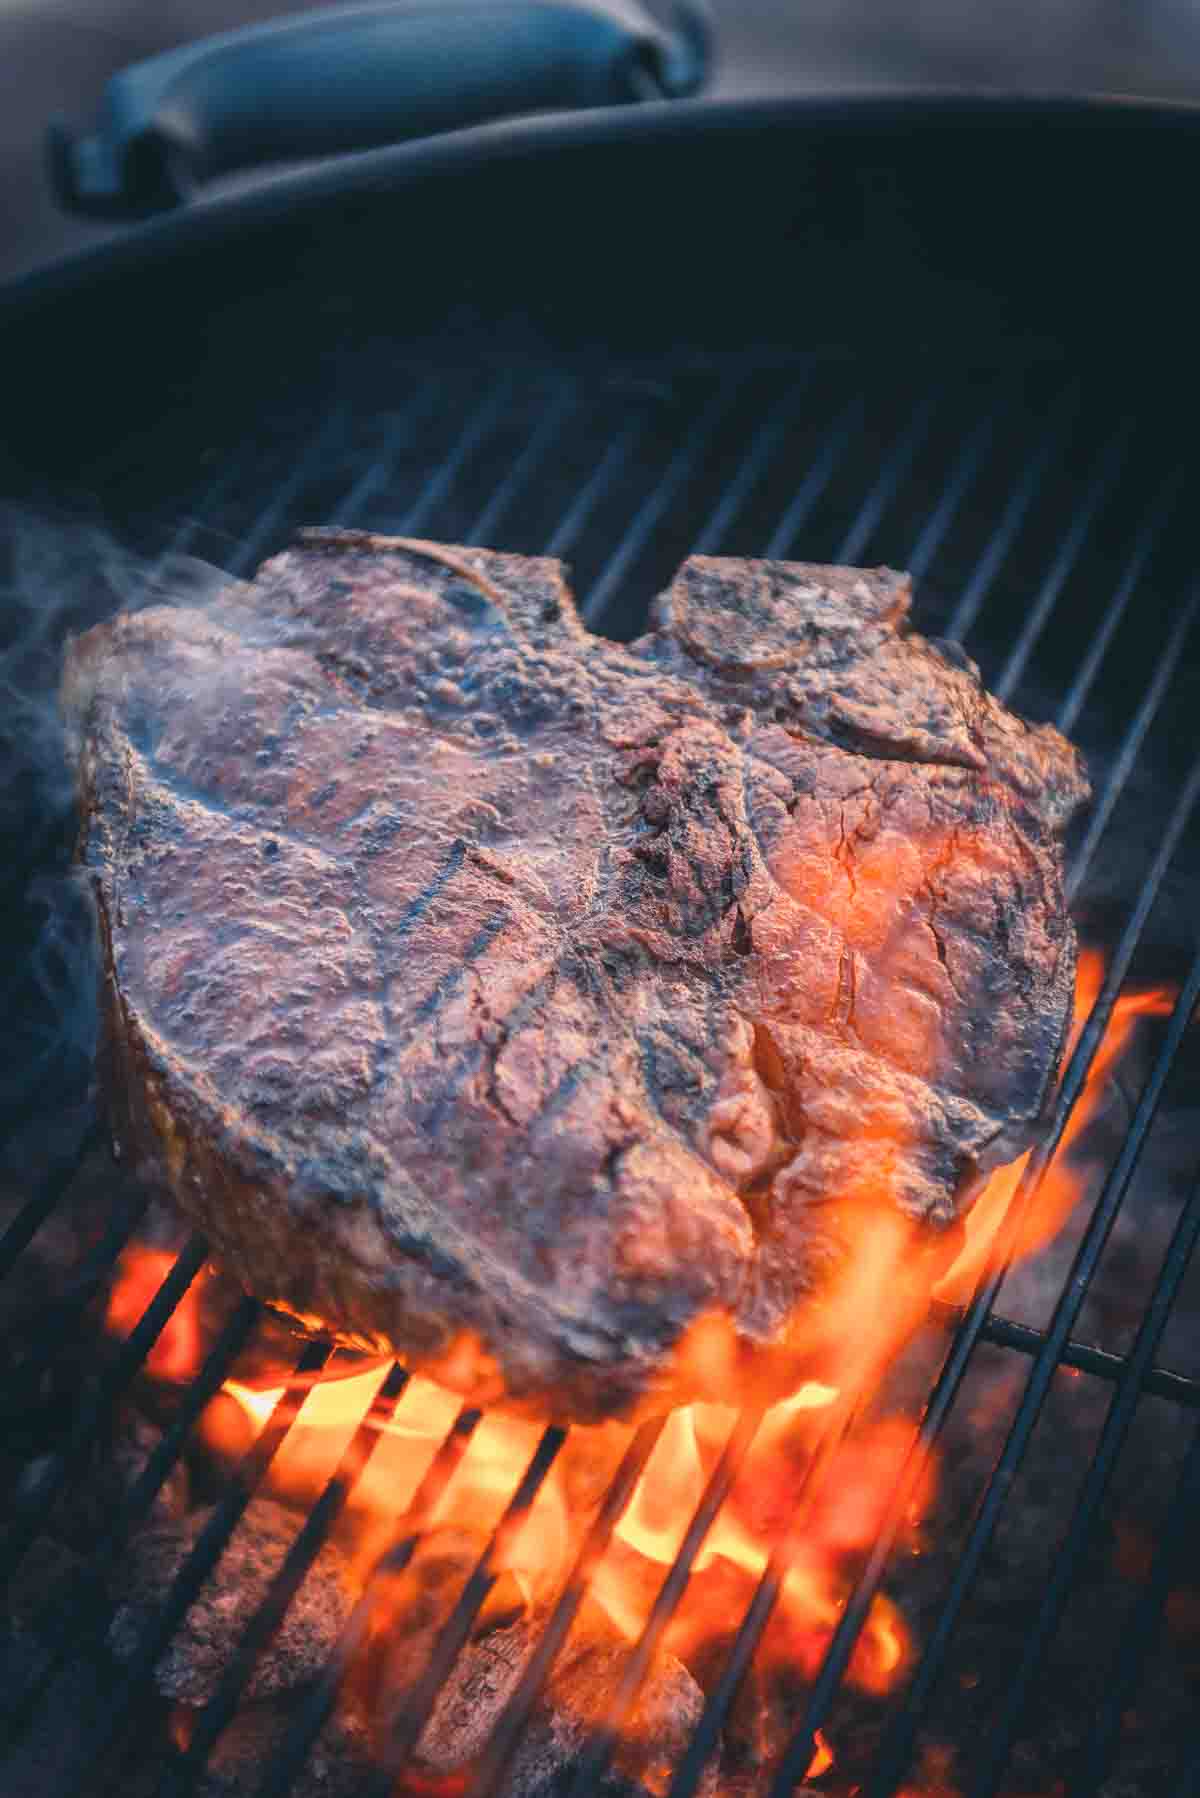 Steak being kissed by flame on the grill grates. 